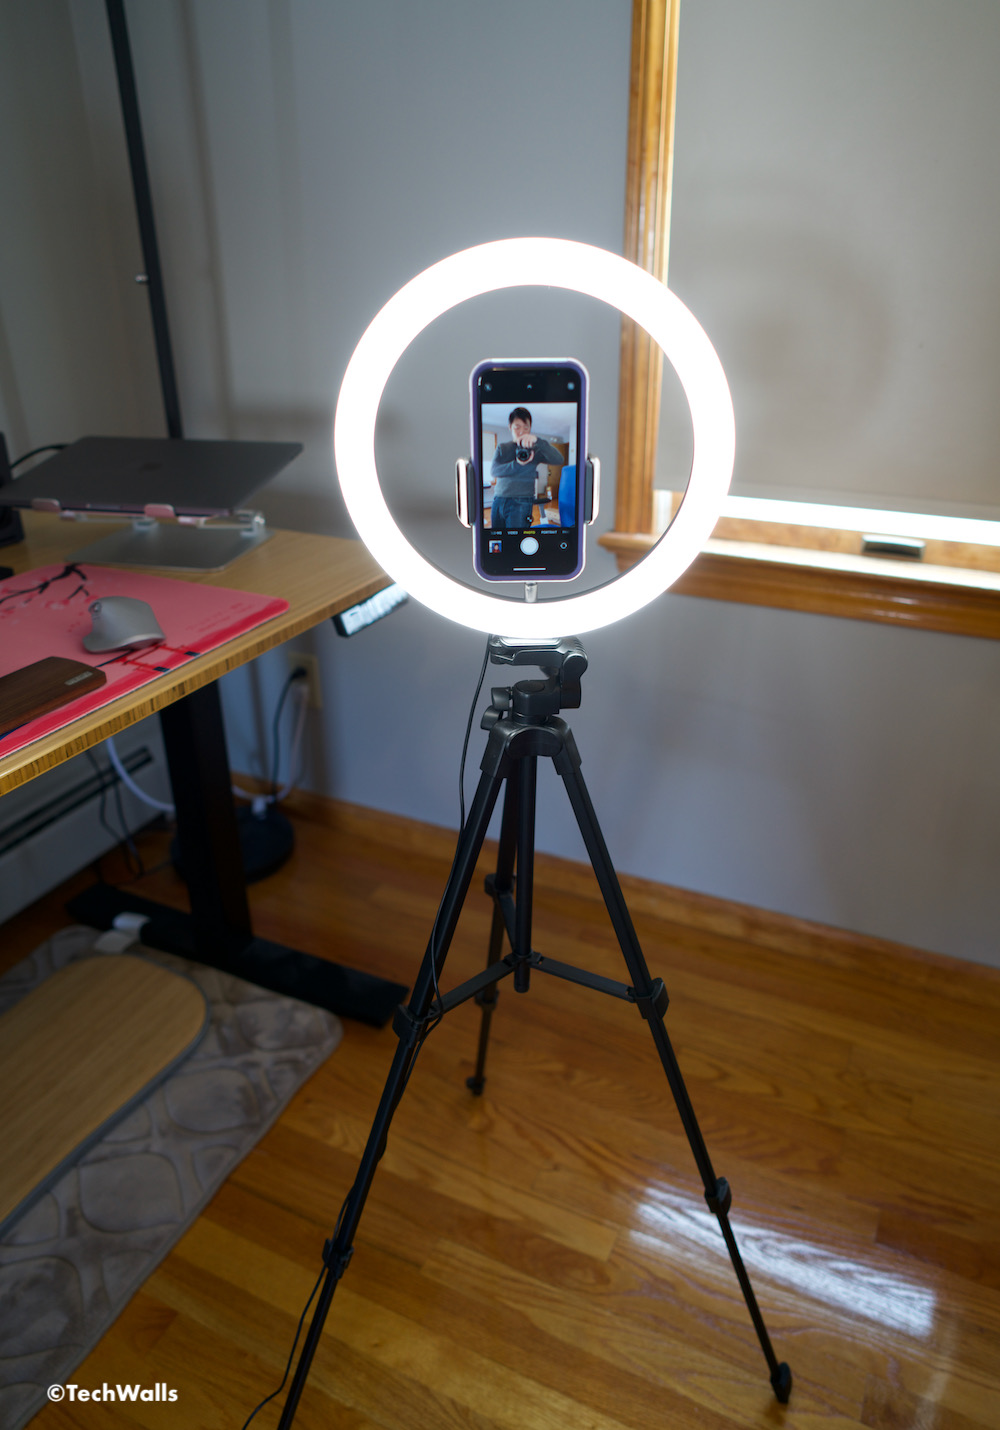 What is a Ring Light & Why Should I Use It?